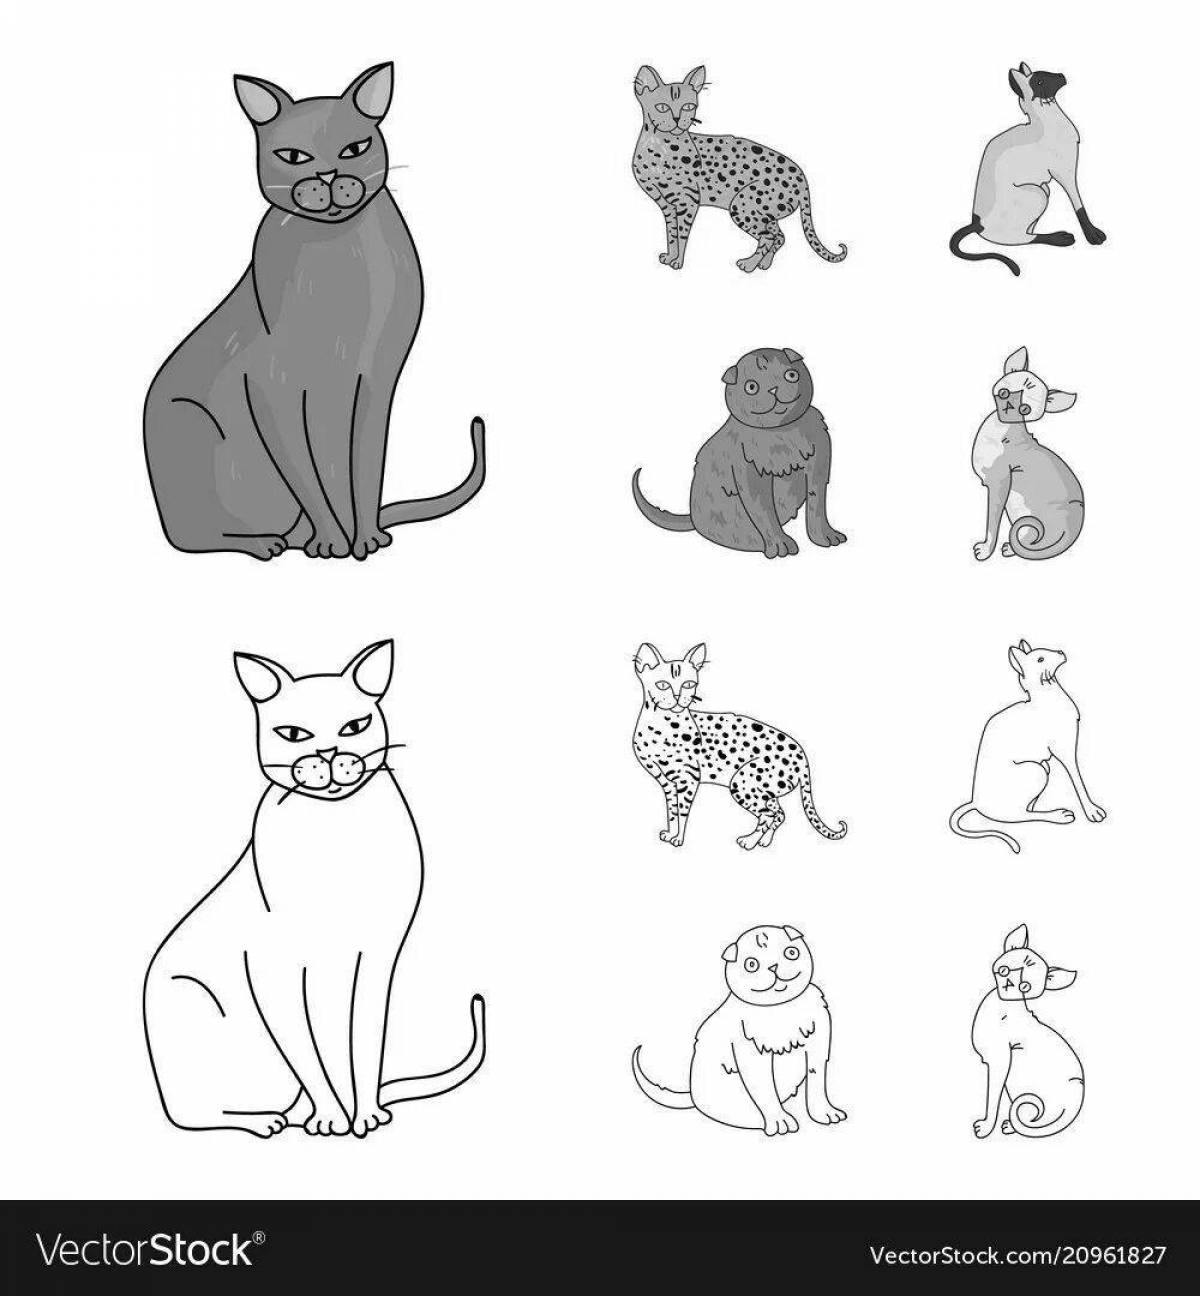 A fascinating coloring book of cat breeds with names